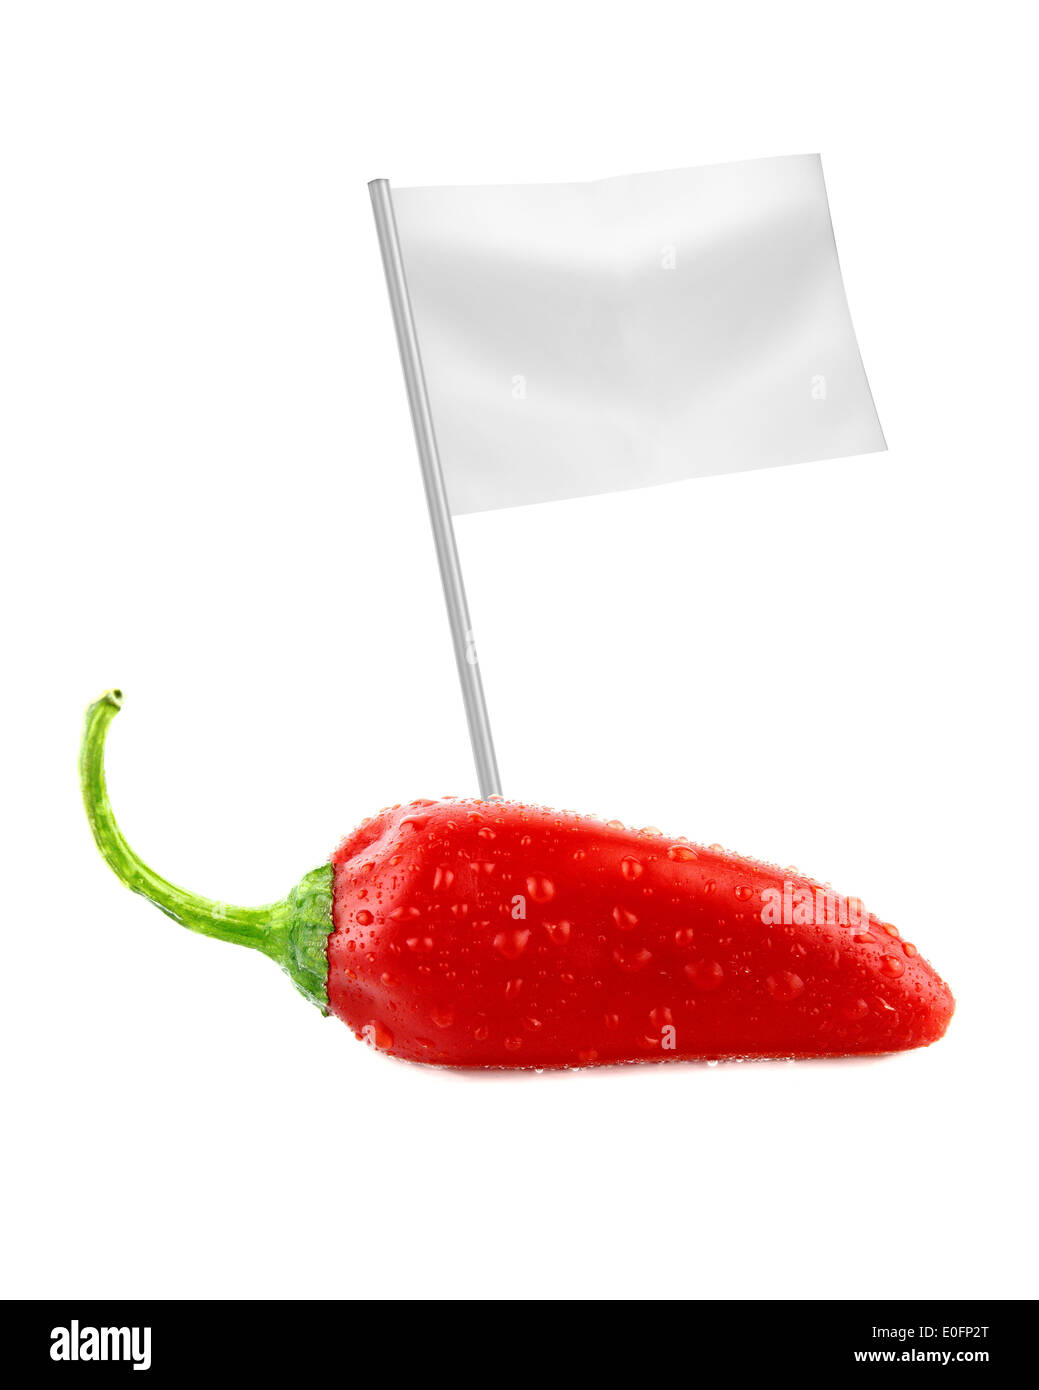 Healthy and organic food concept. Fresh red hot chili pepper with flag showing the benefits or the price of fruits. Stock Photo